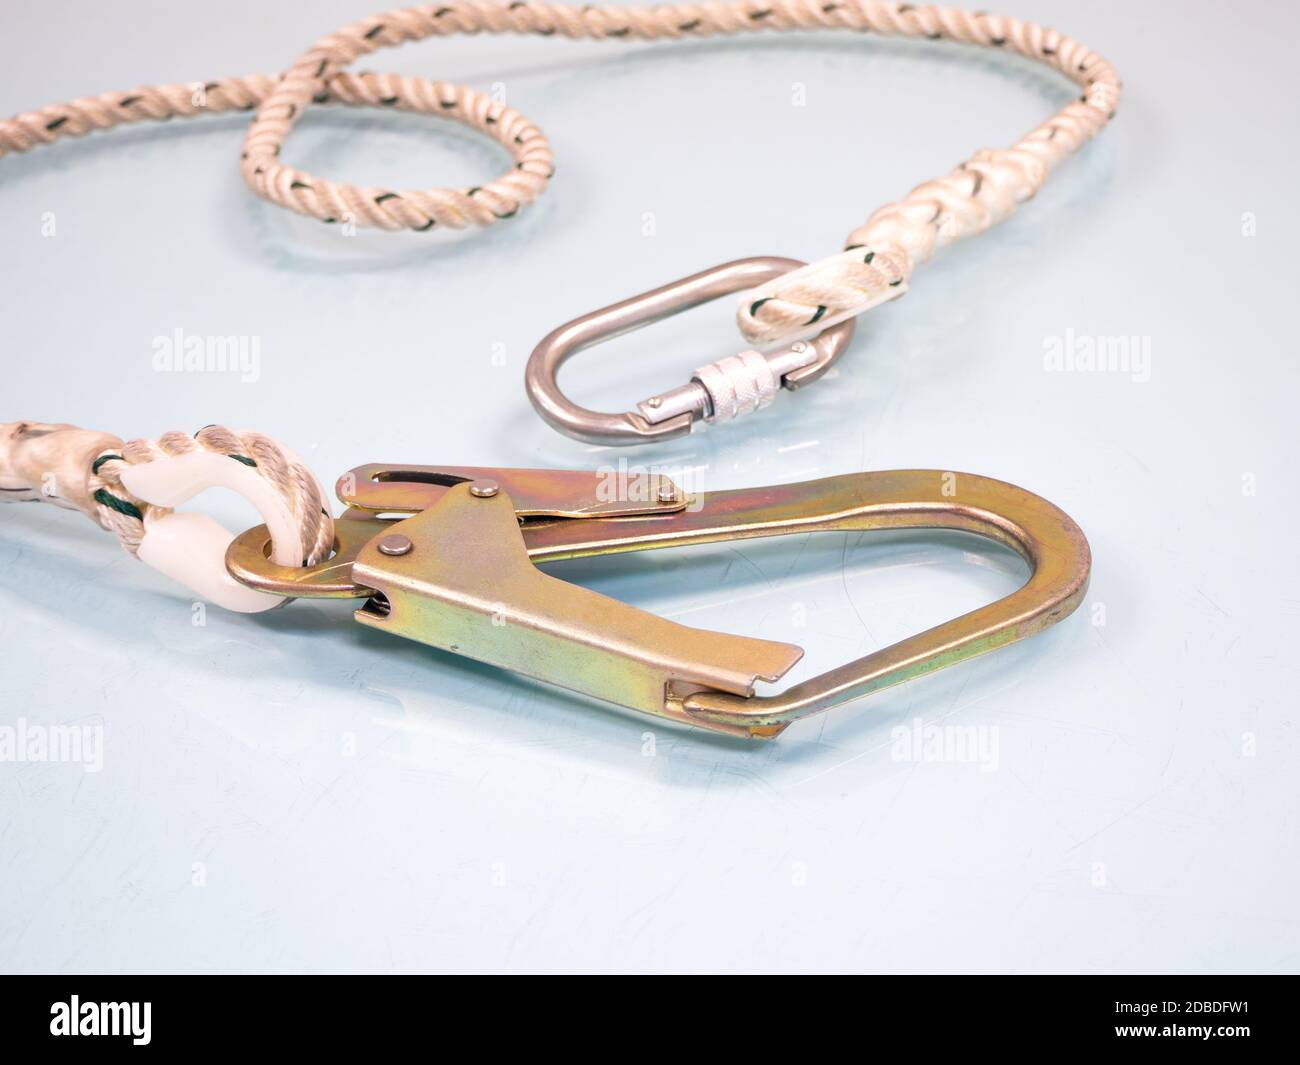 Figure eight knot with carabiner. Silver carabiner with lock andrope isolated on white background. Stock Photo